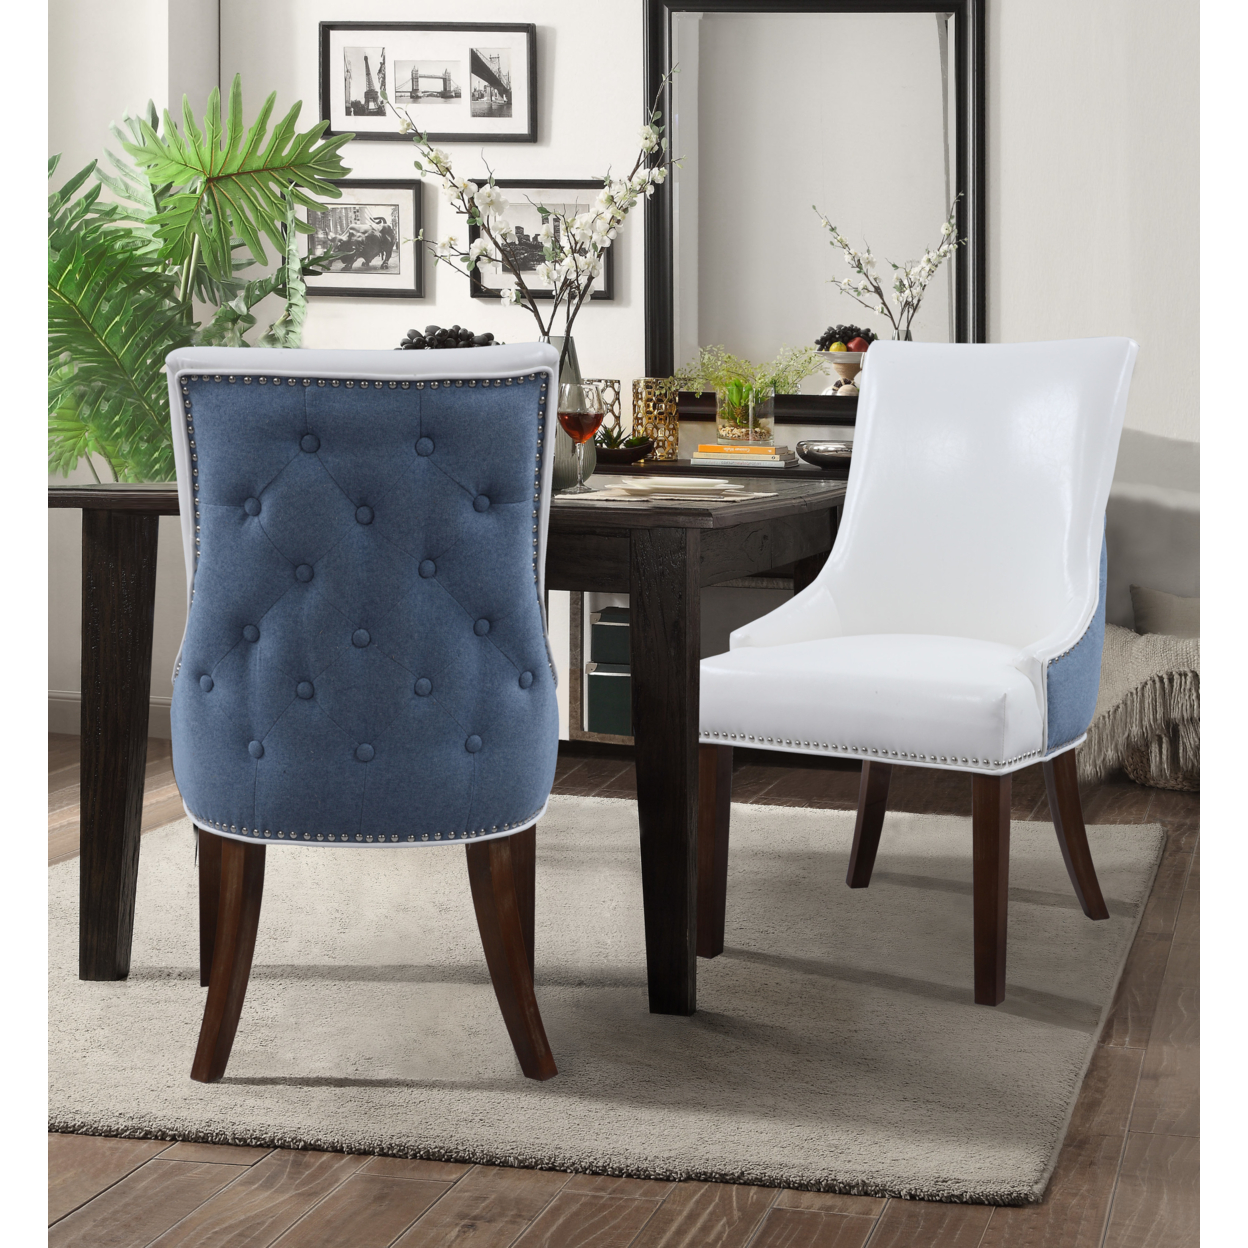 Taylor PU Leather Dining Chair, Set Of 2, Linen Button Tufted With Silver Nailhead Solid Birch Legs - Navy